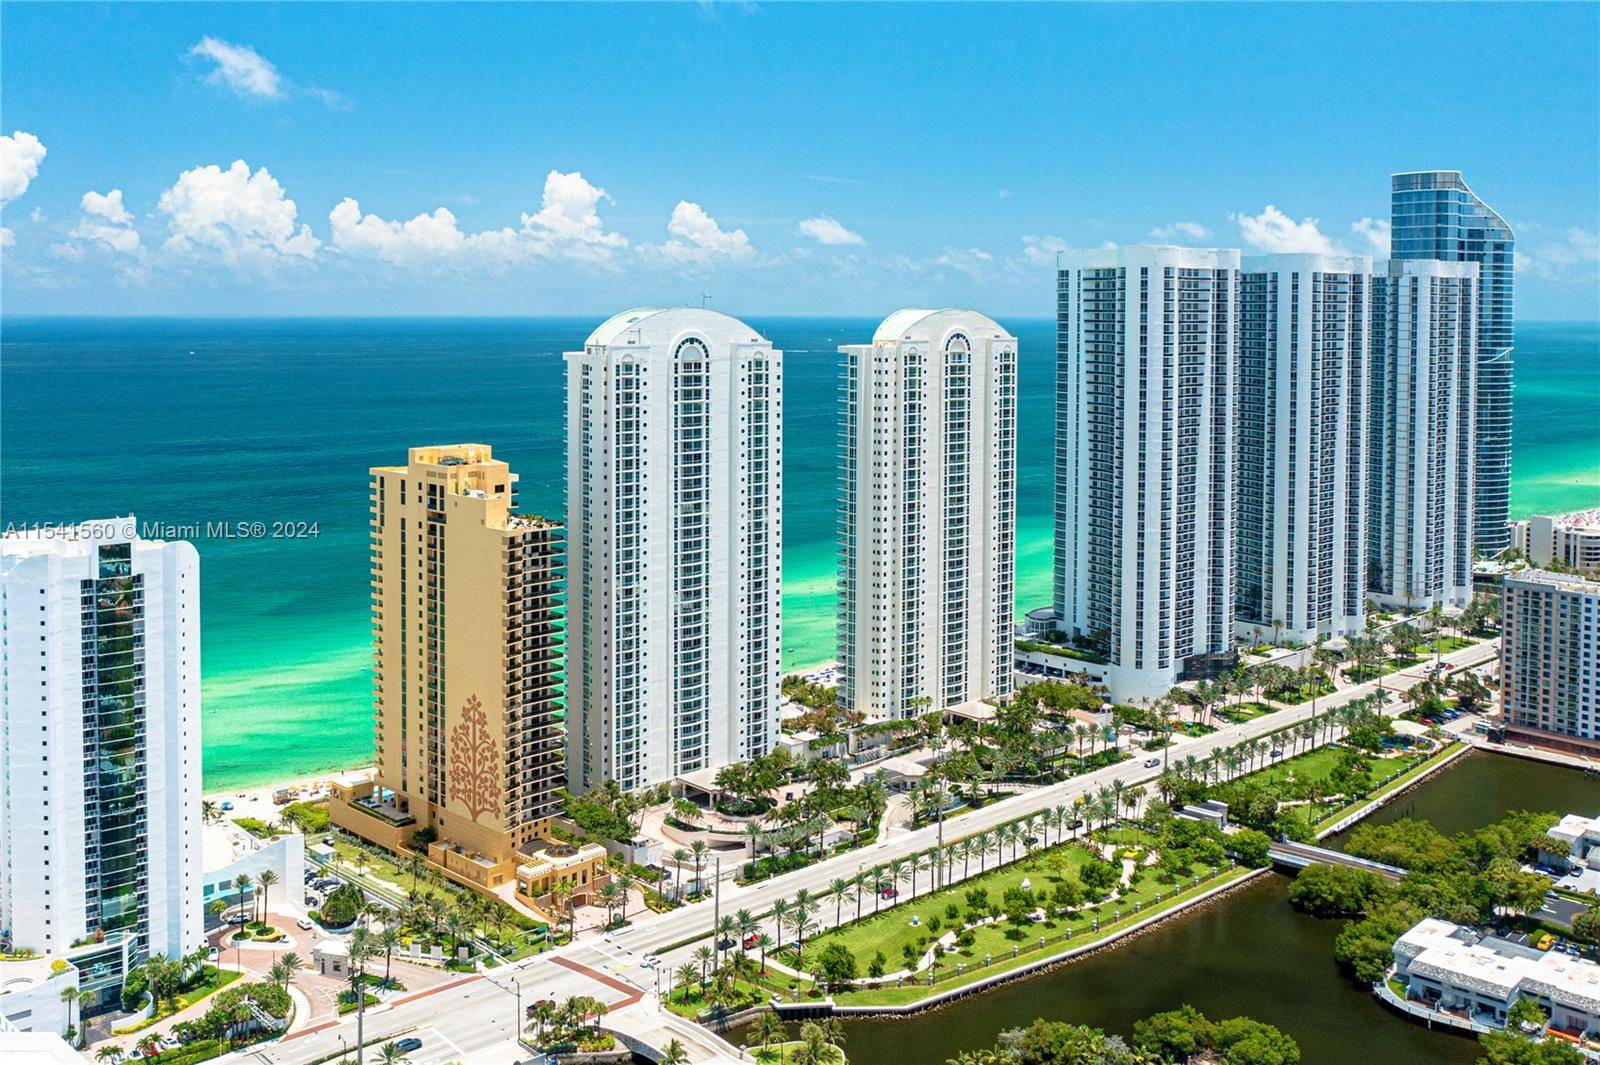 Welcome to your dream sanctuary by the sea, an exquisite luxury oceanfront condo that offers an unparalleled coastal living experience.